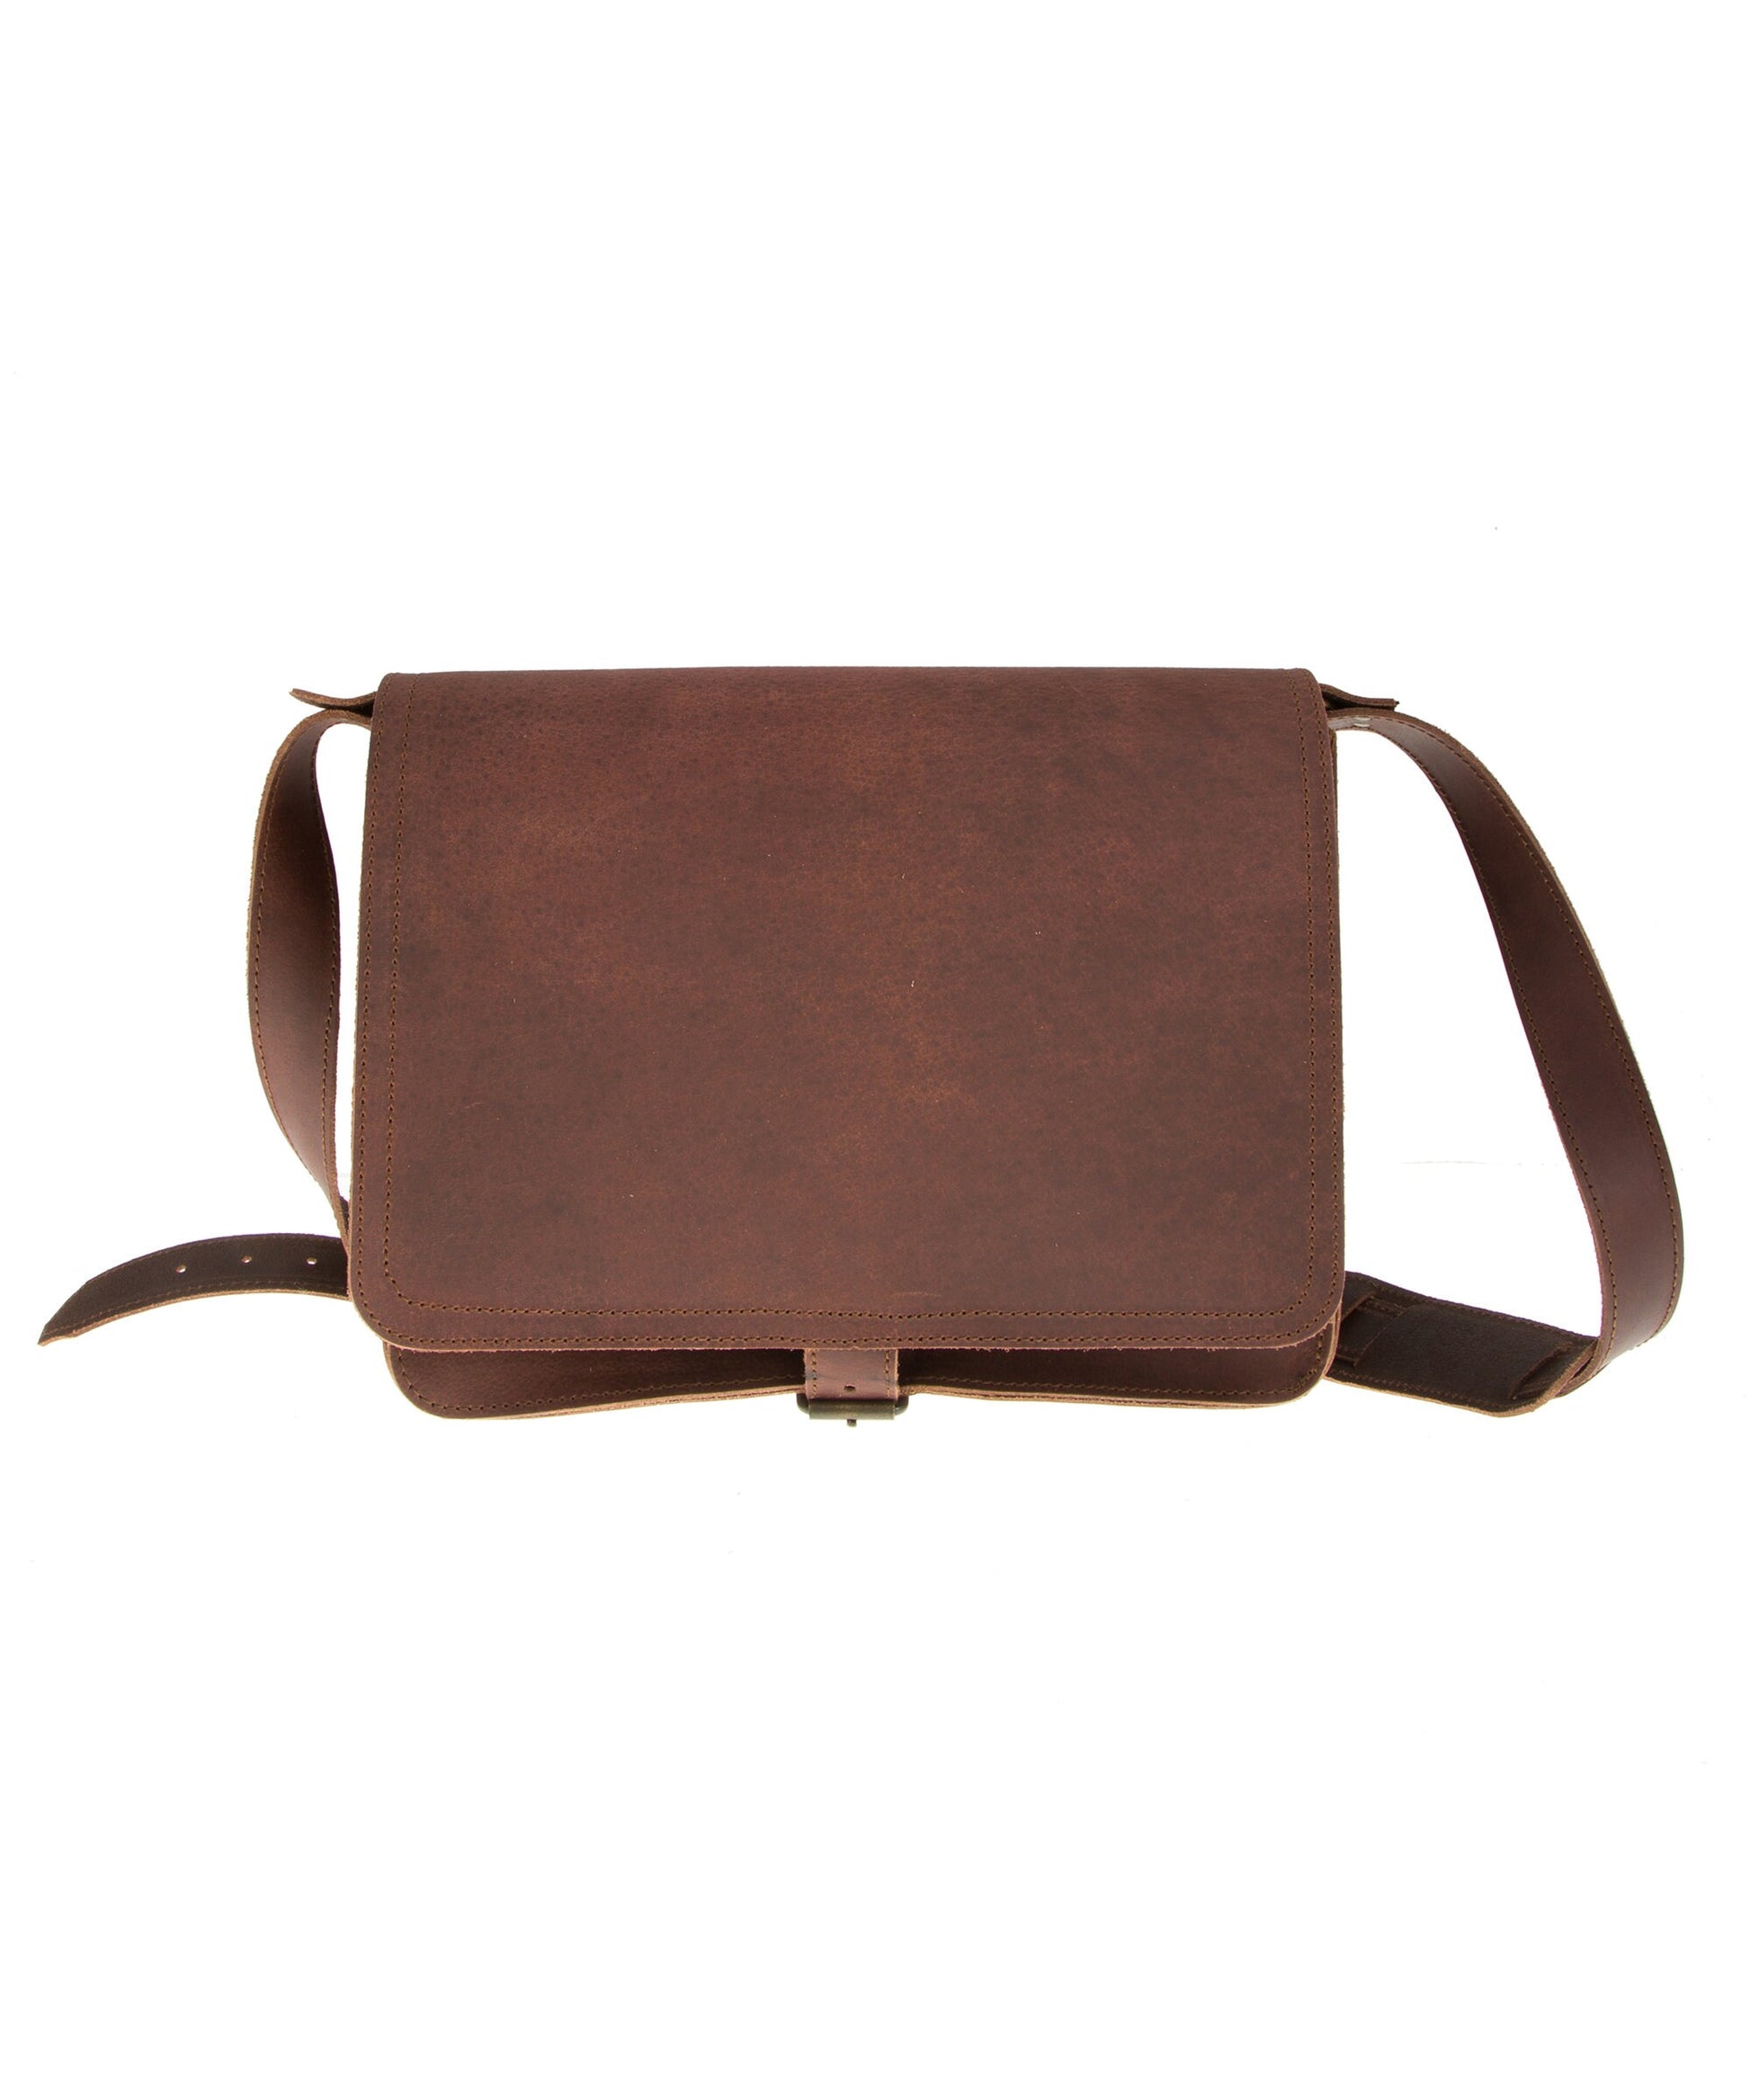 Leather messenger bag men, Leather laptop bag, Leather briefcase, Leather accessories for men